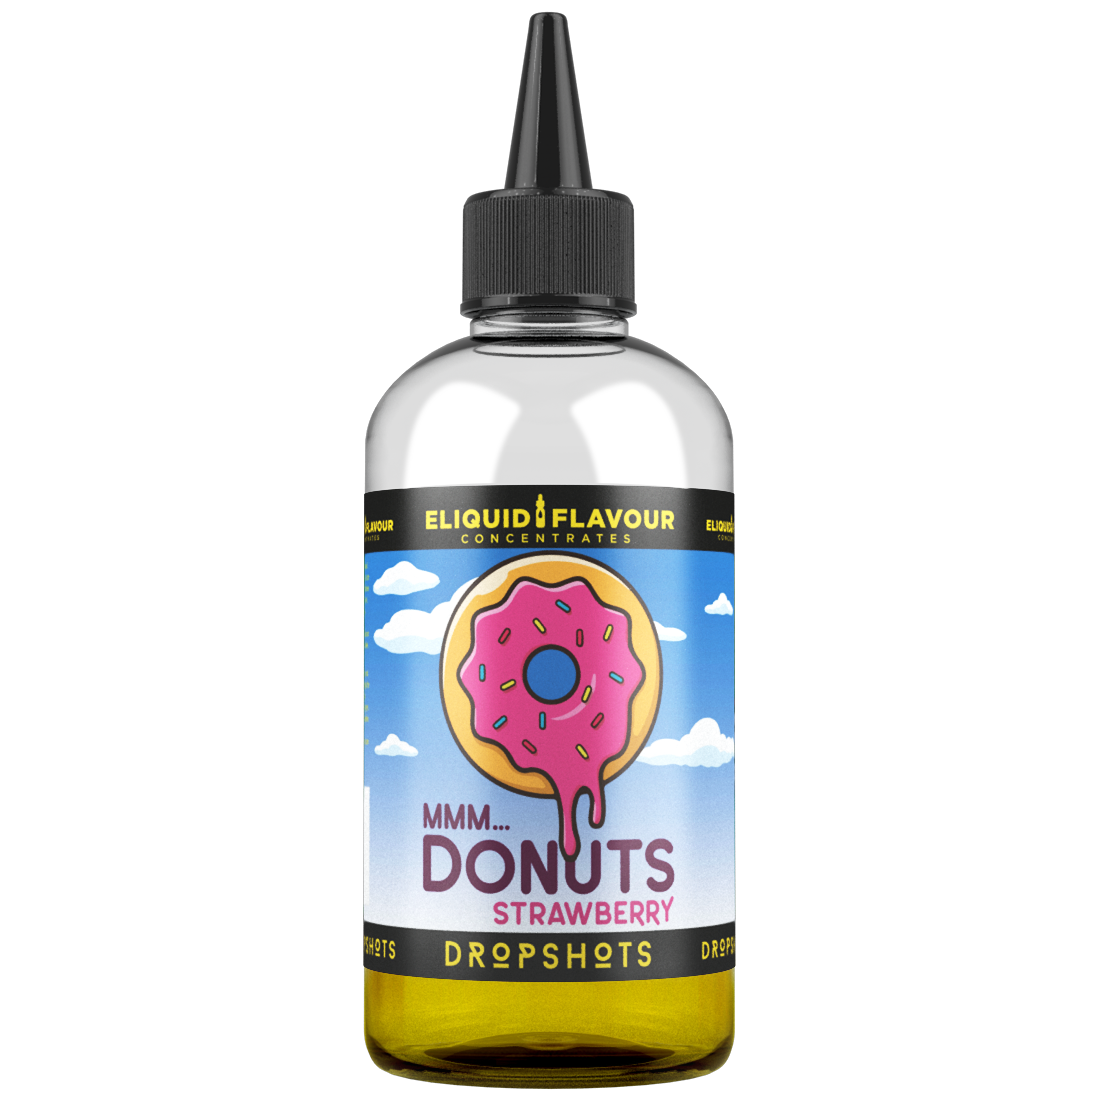 Mmm... Donuts - Strawberry DropShot by ELFC